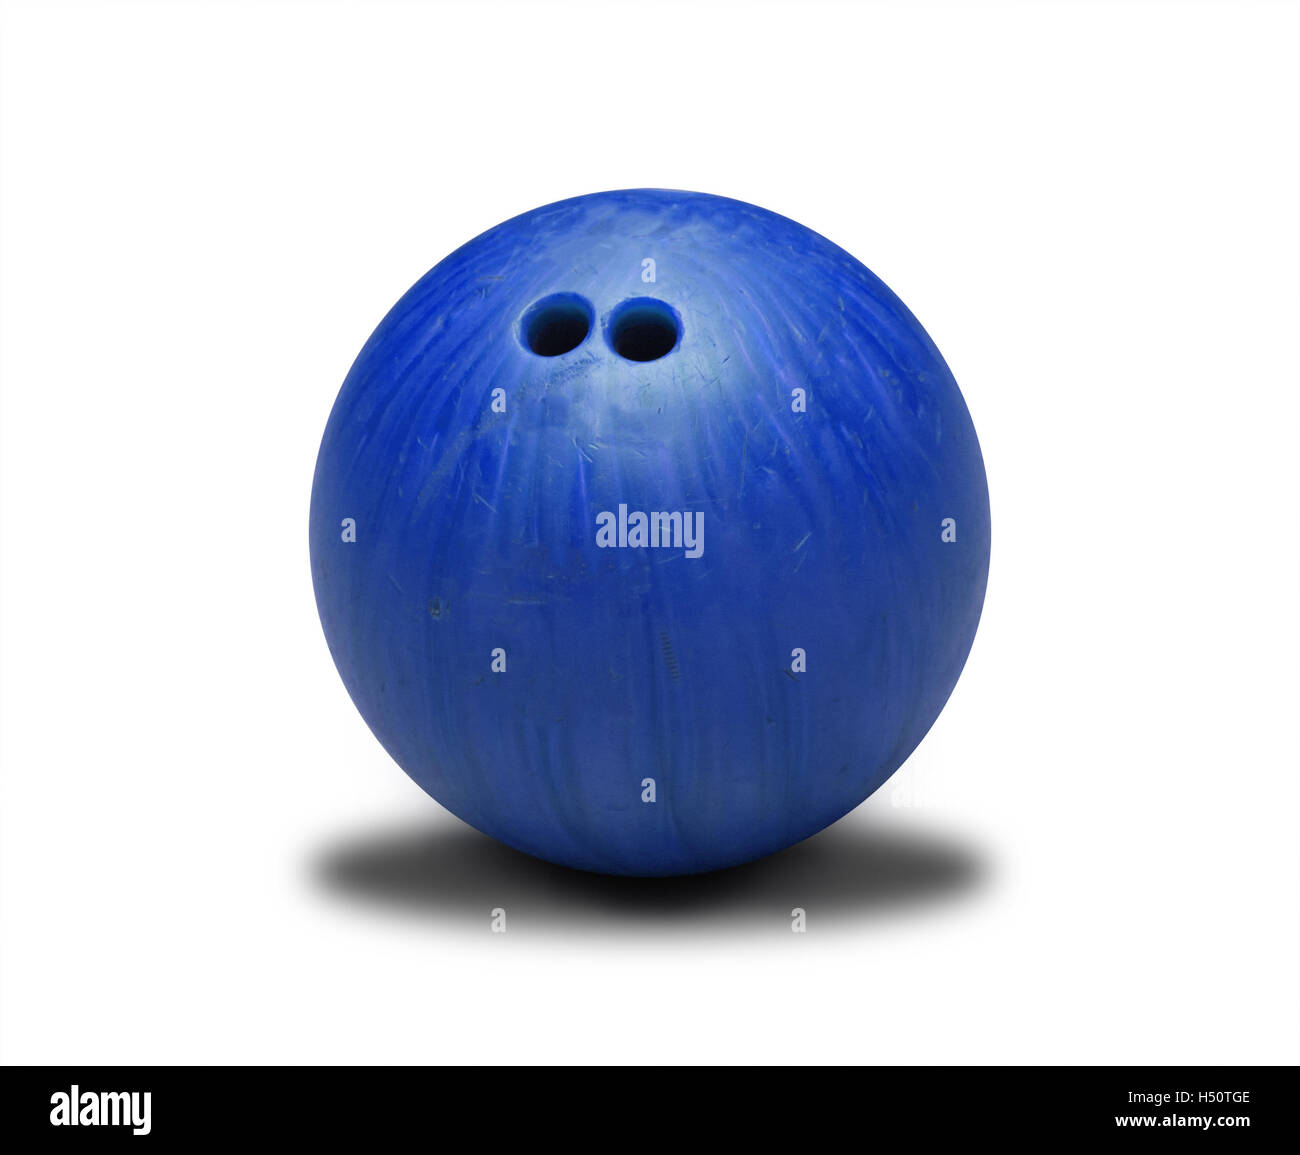 Blue bowling ball isolated on white background. Stock Photo